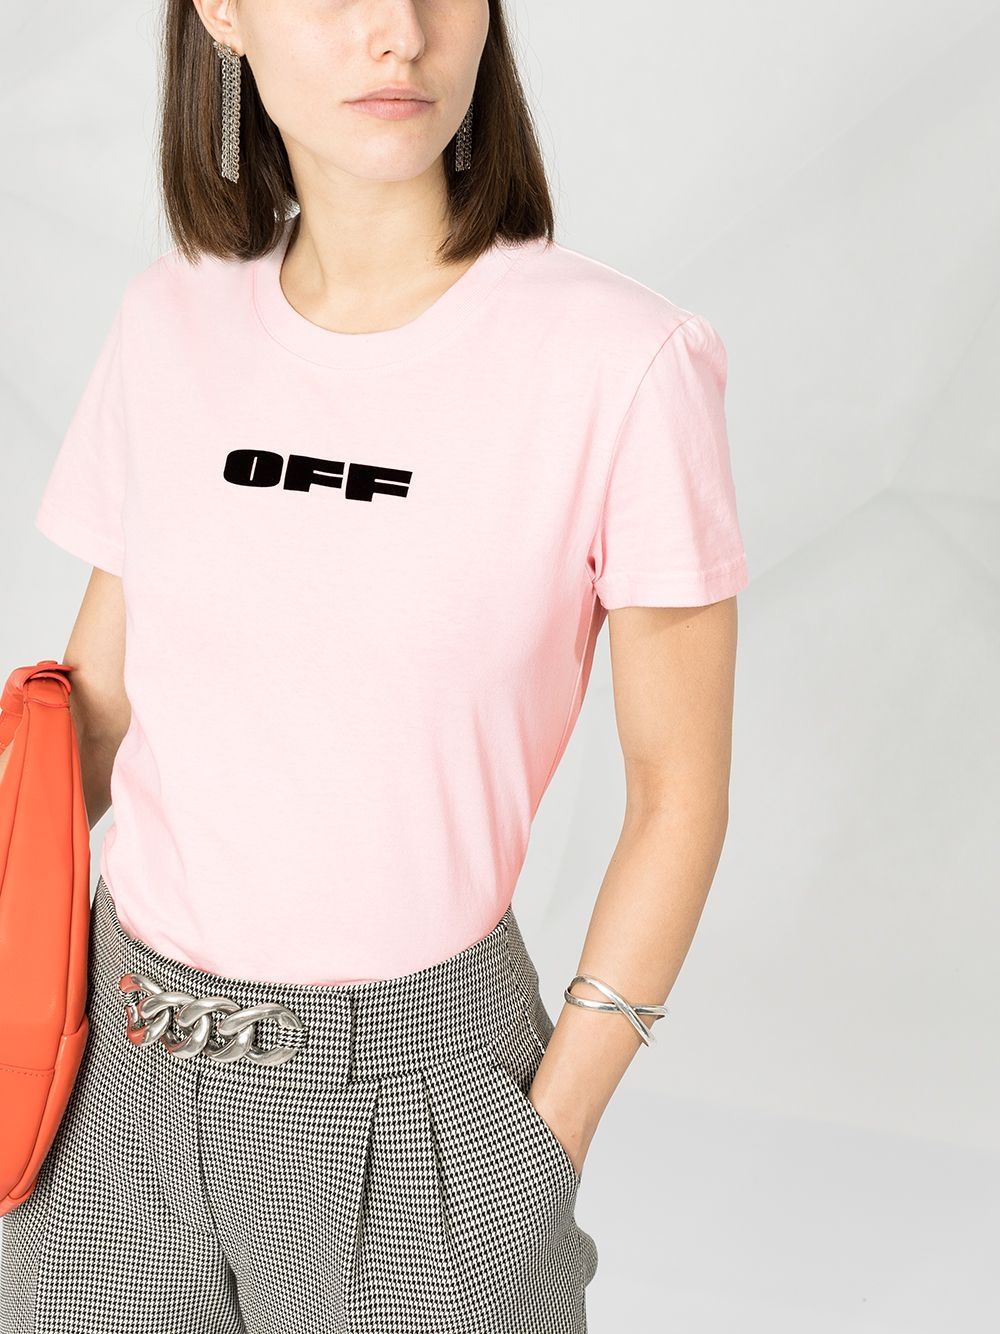 Off bold flock casual tee pink black